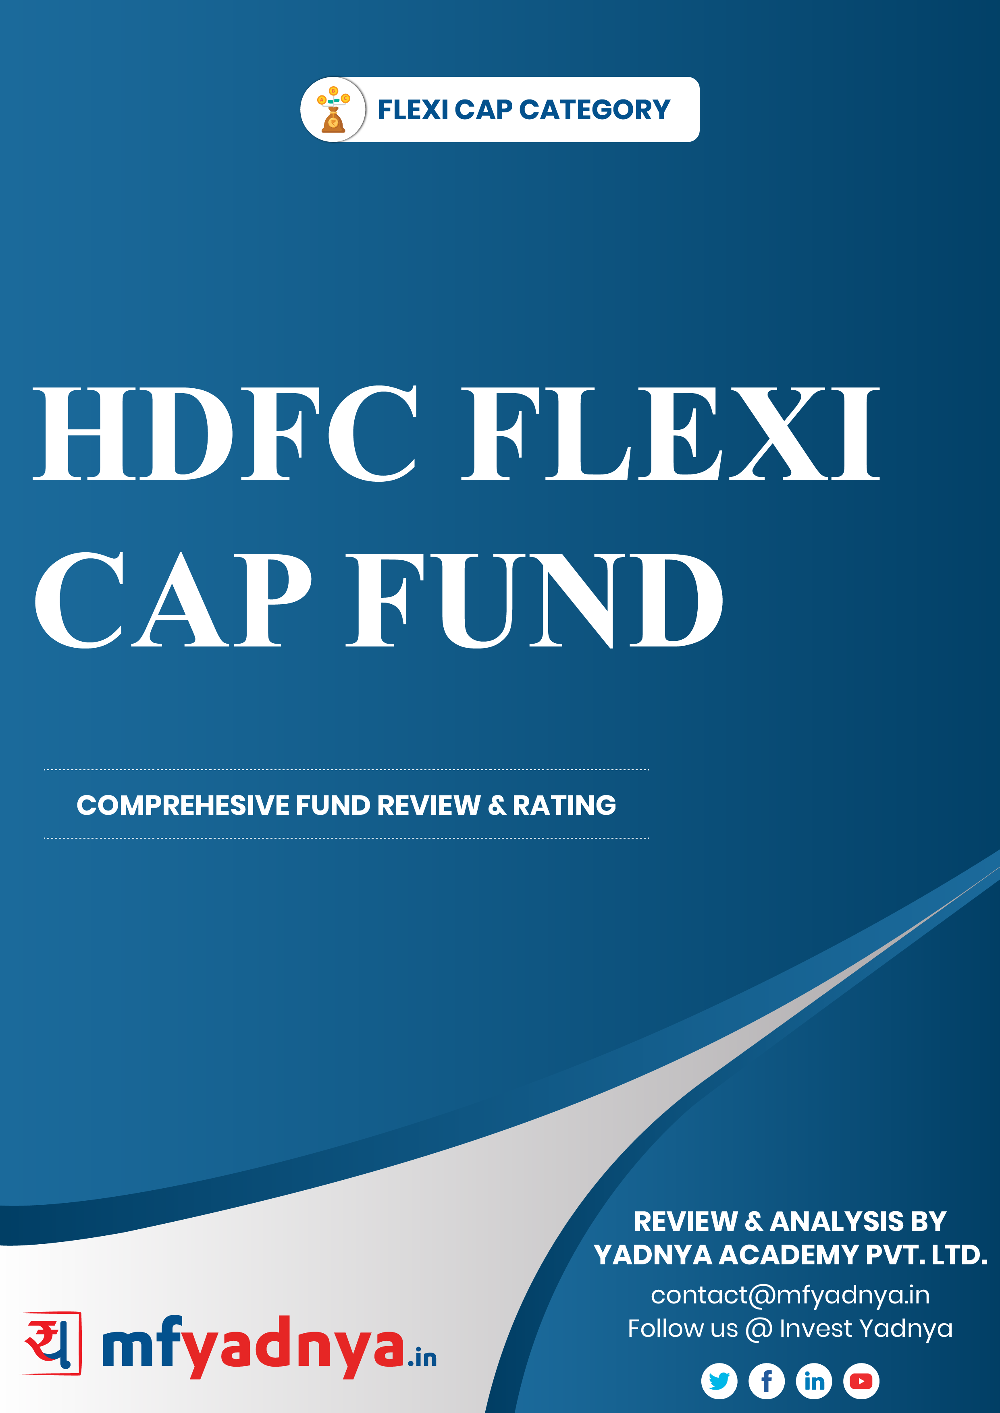 This e-book offers a comprehensive mutual fund review of HDFC equity fund for multi-cap category. It reviews the fund's return, ratio, allocation etc. ✔ Detailed Mutual Fund Analysis ✔ Latest Research Reports